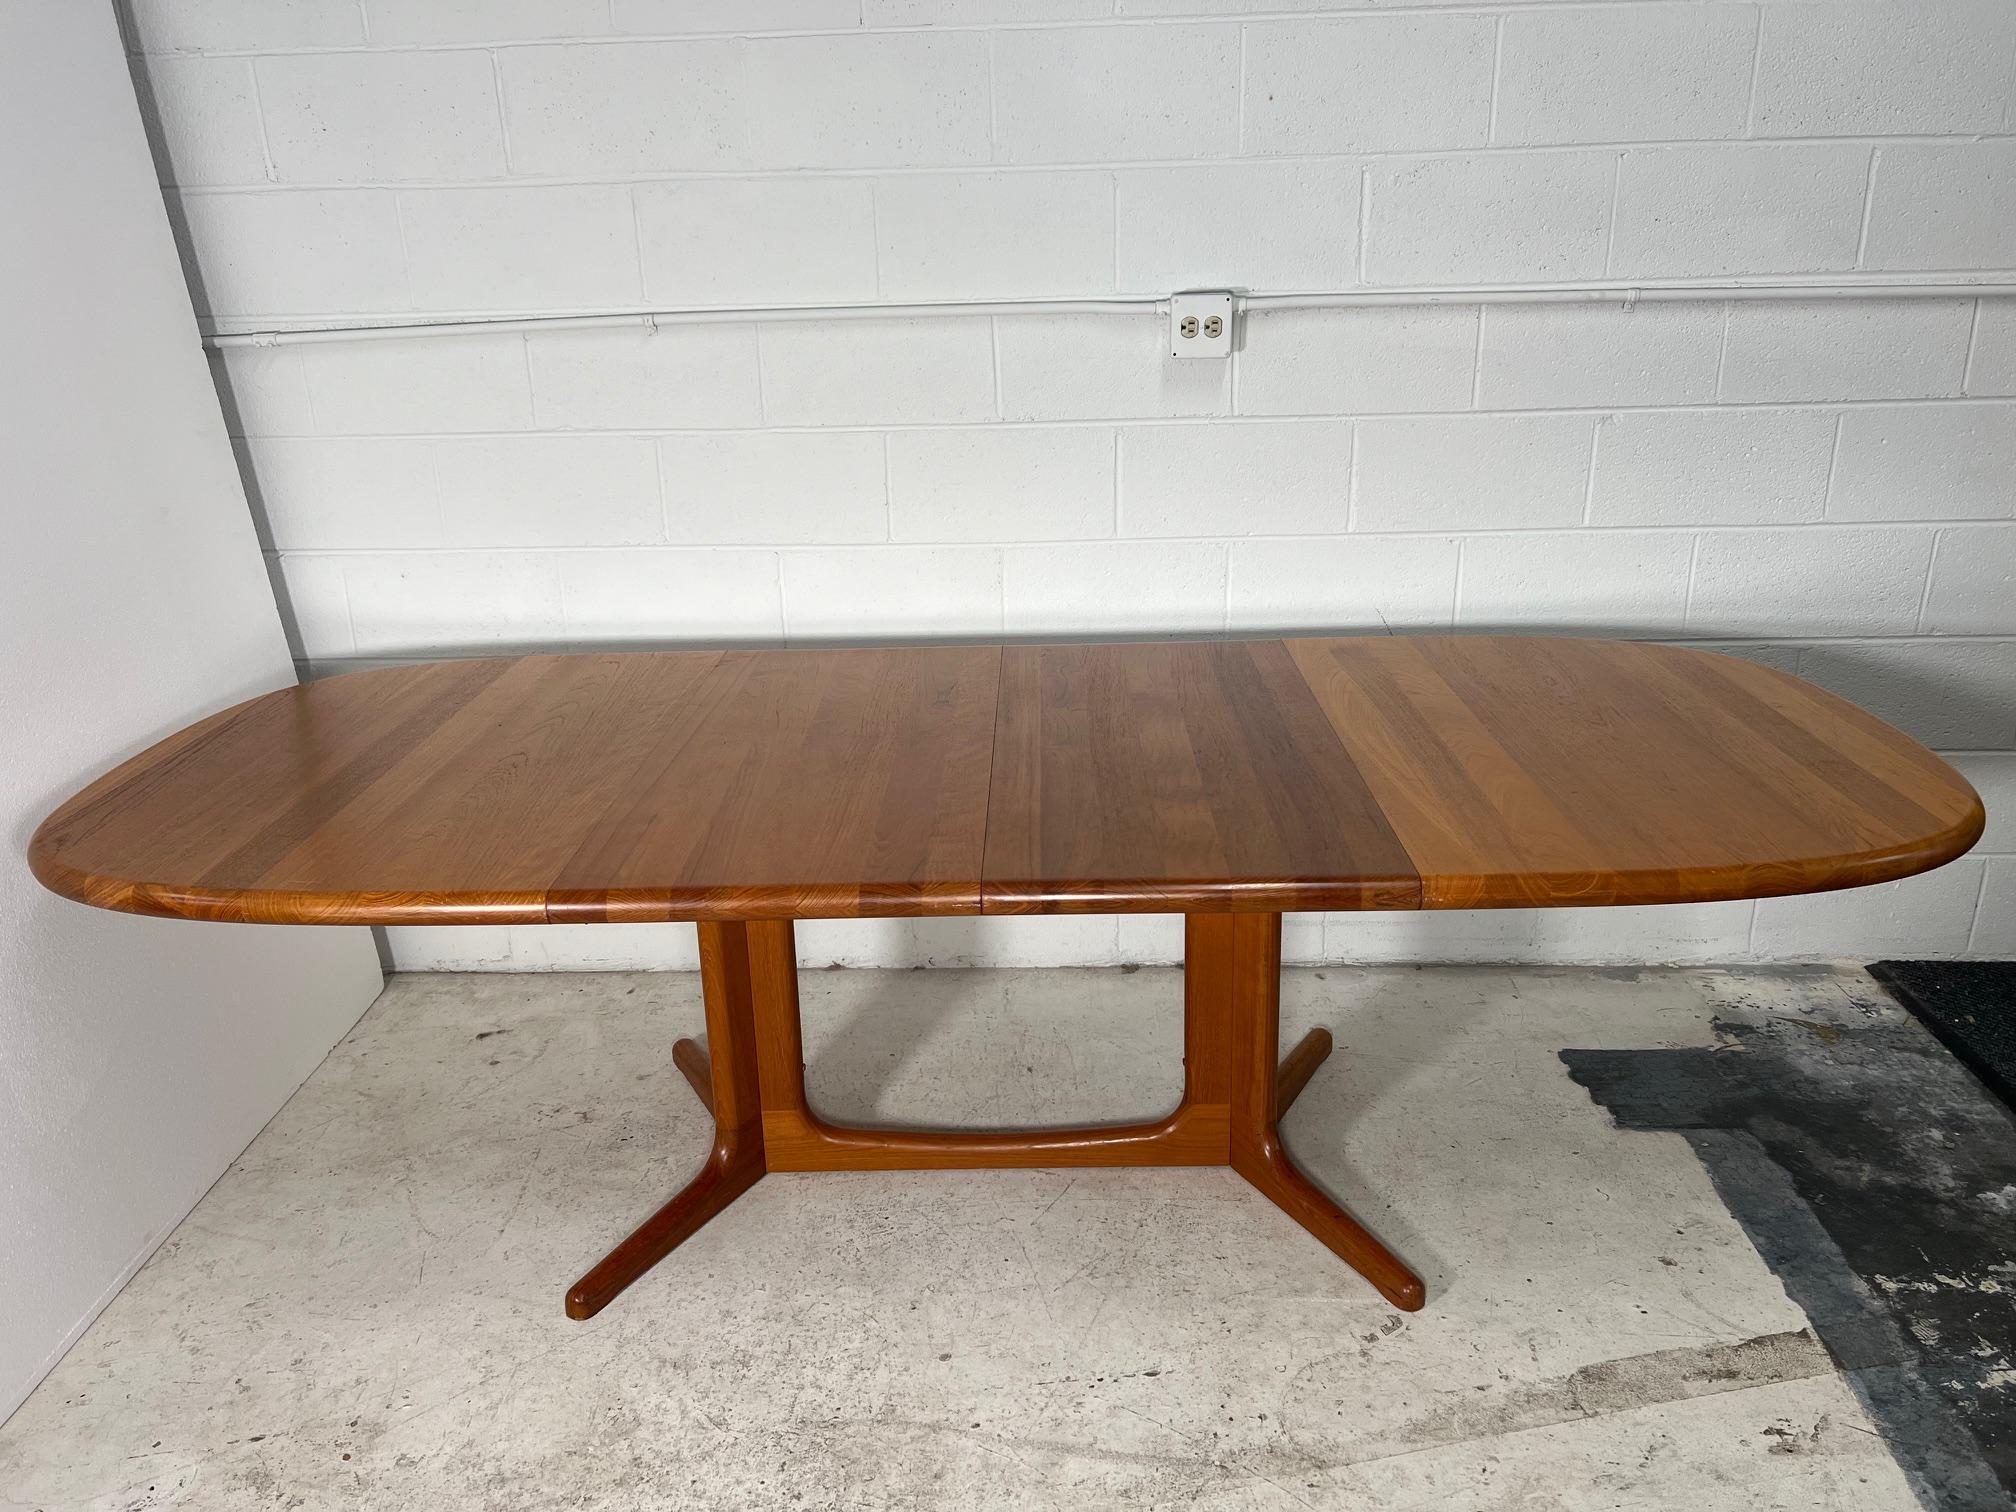 This is a Danish teak dining table with 2 leaves. Made by Glostrup Møbelfabrik. Original label still present. Leaves can be stored inside the table when not in use. The table can be extended with one or with both leaves.
It seats 10 people